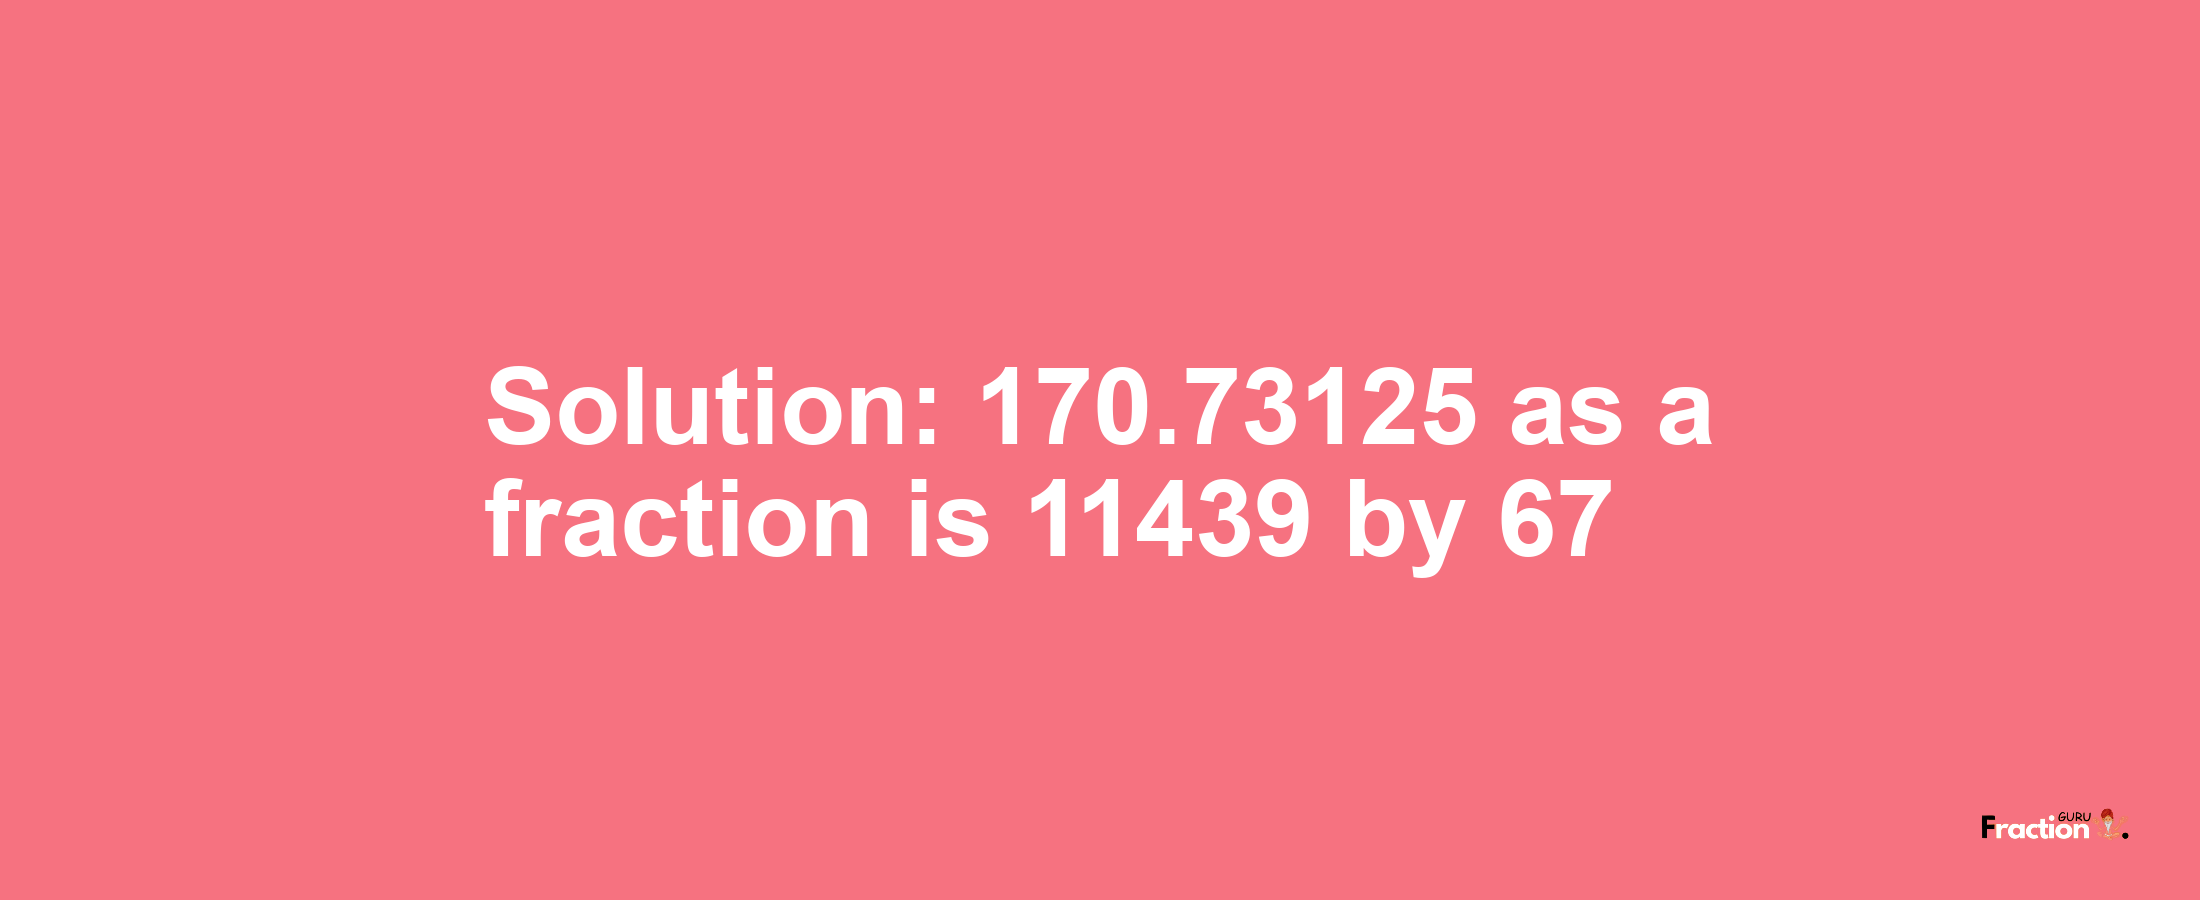 Solution:170.73125 as a fraction is 11439/67